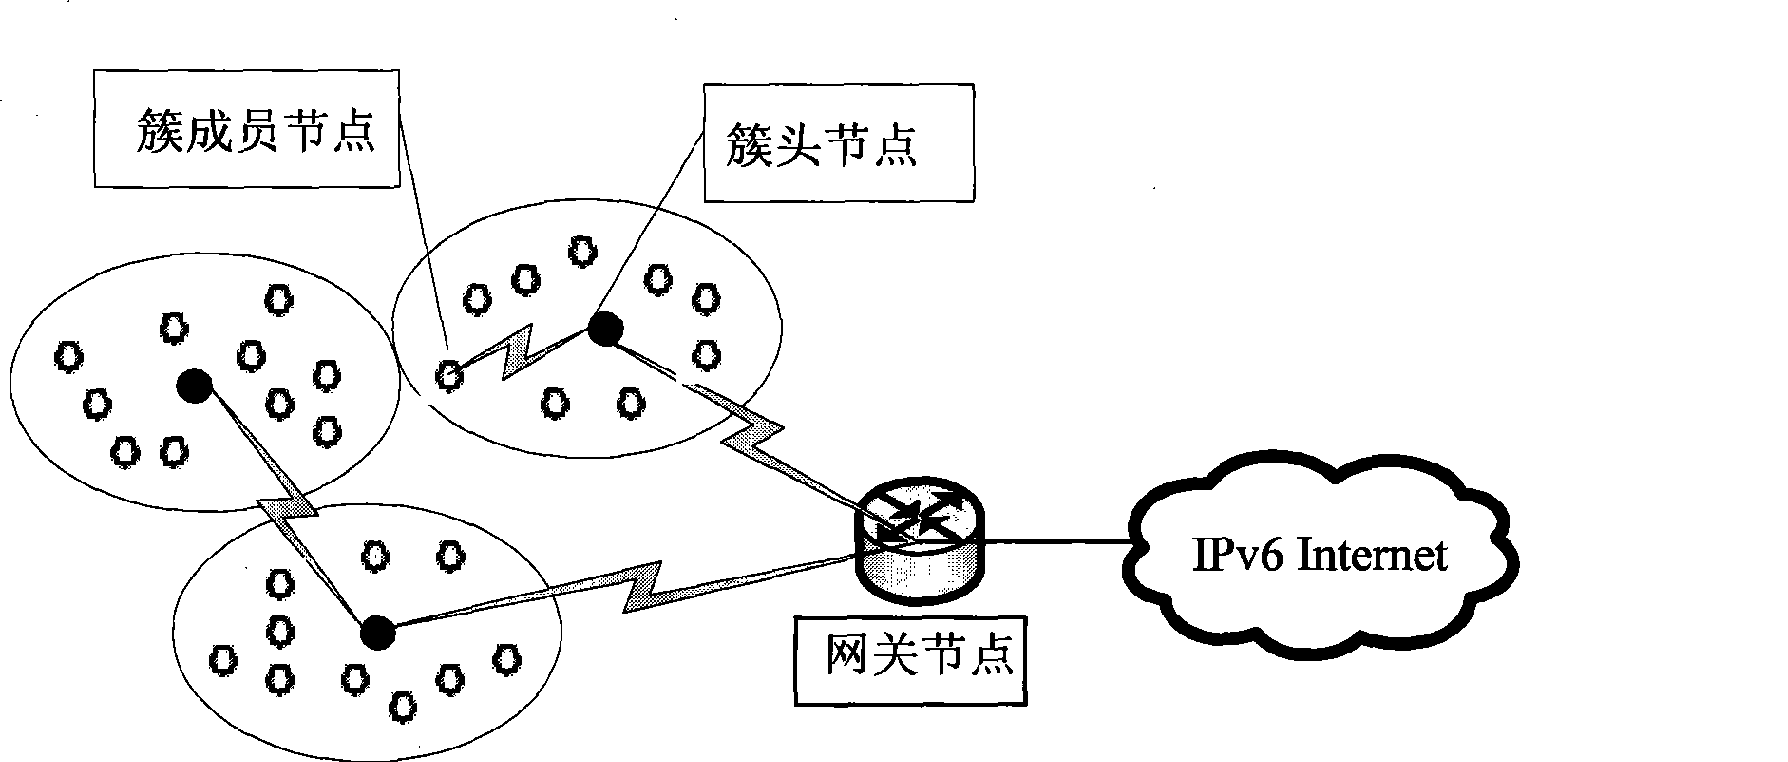 System for implementing complete IP communication between wireless sensor network and IPv6 network